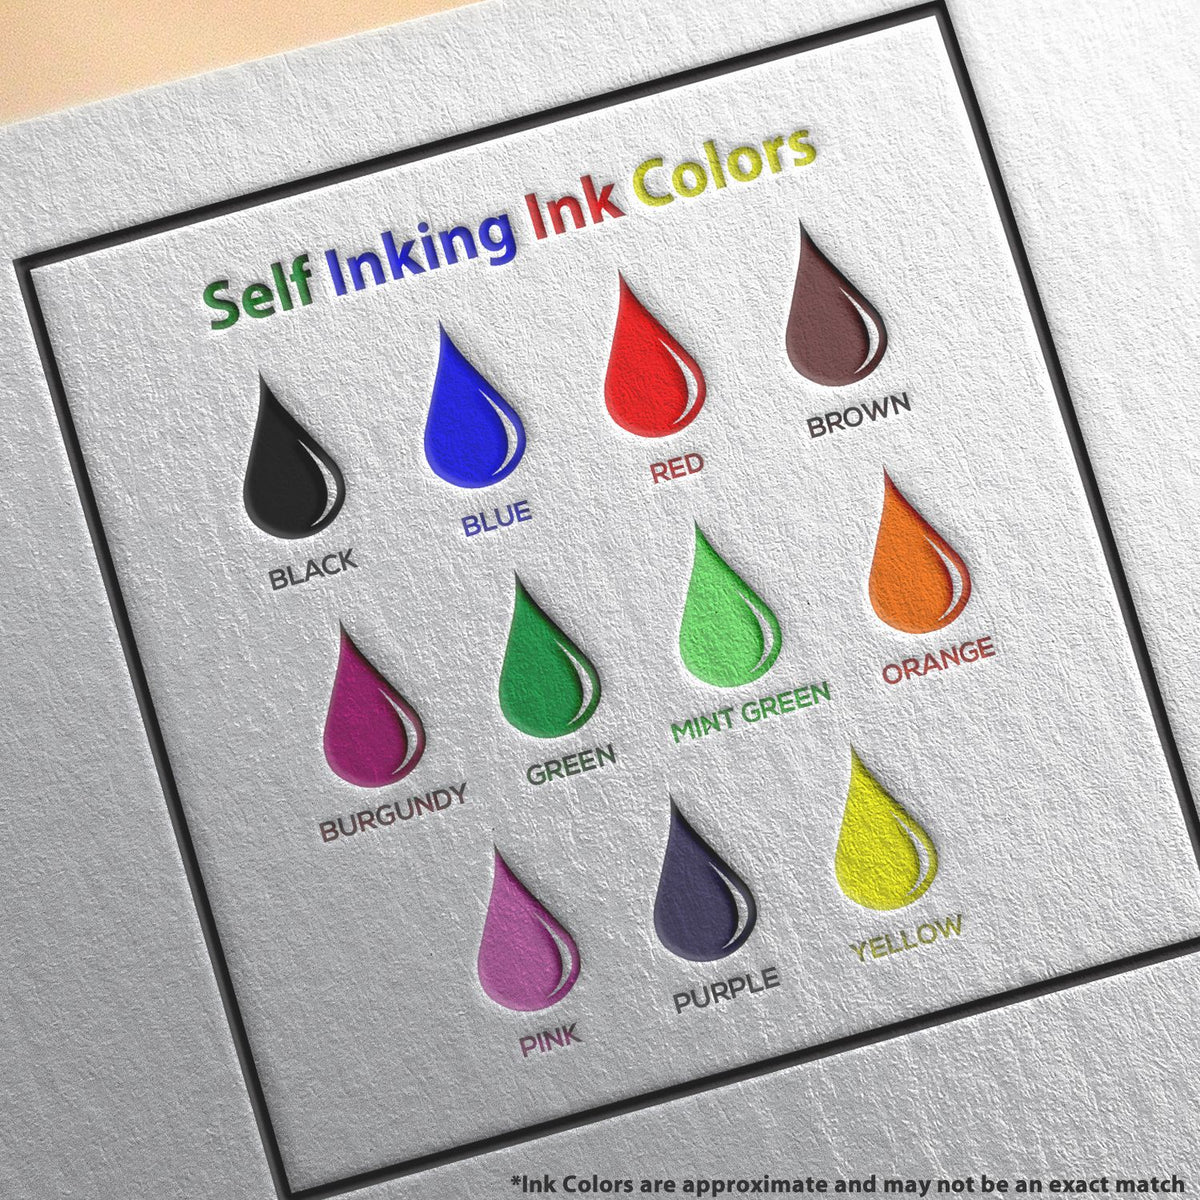 A picture showing the different ink colors or hues available for the Self-Inking Missouri PE Stamp product.